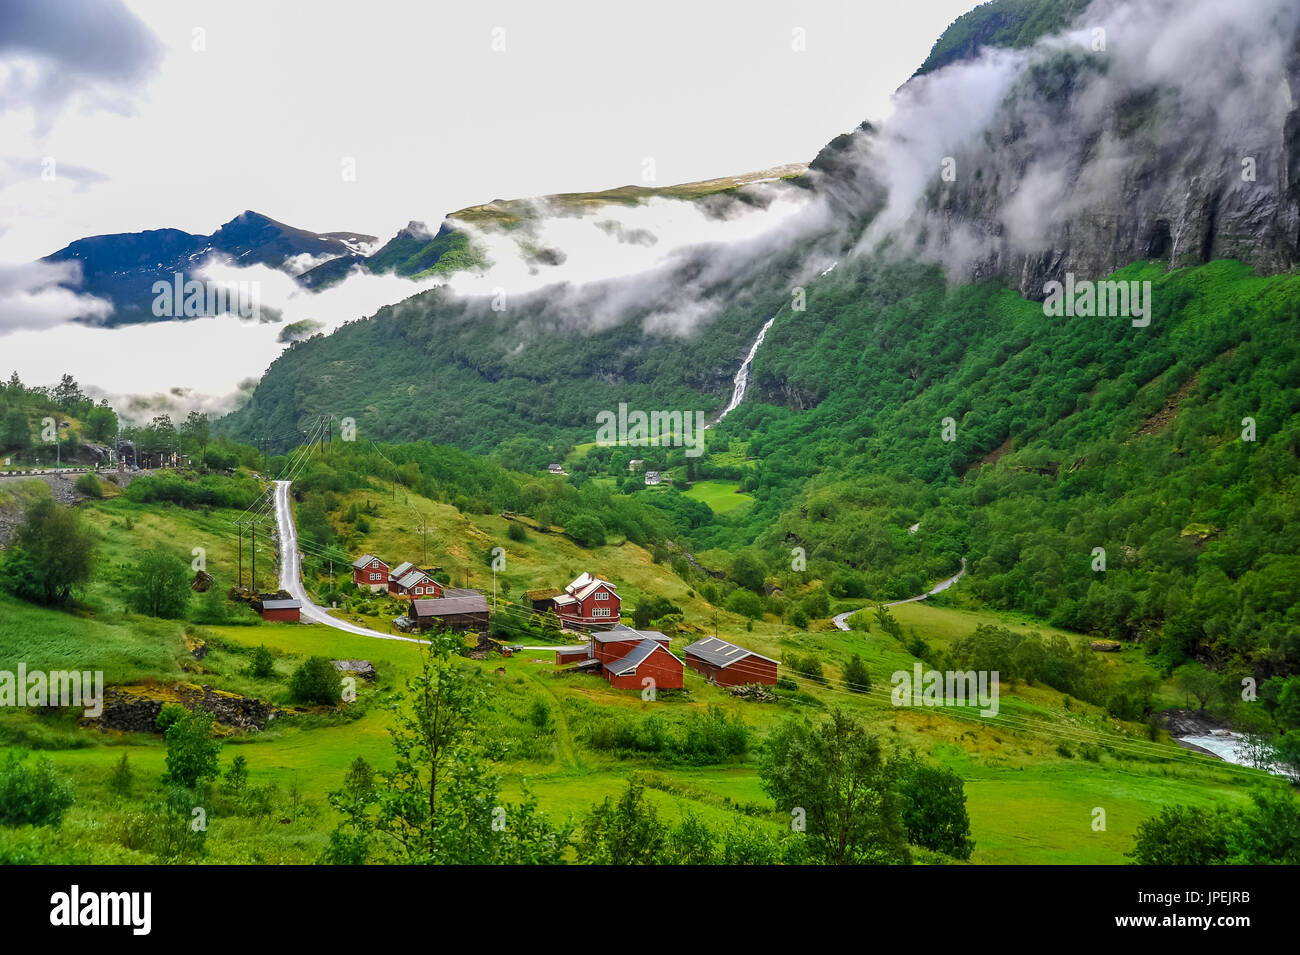 Beautiful Norway landscape and scenery view of village surrounded by green hills and mountain in a cloudy day Stock Photo